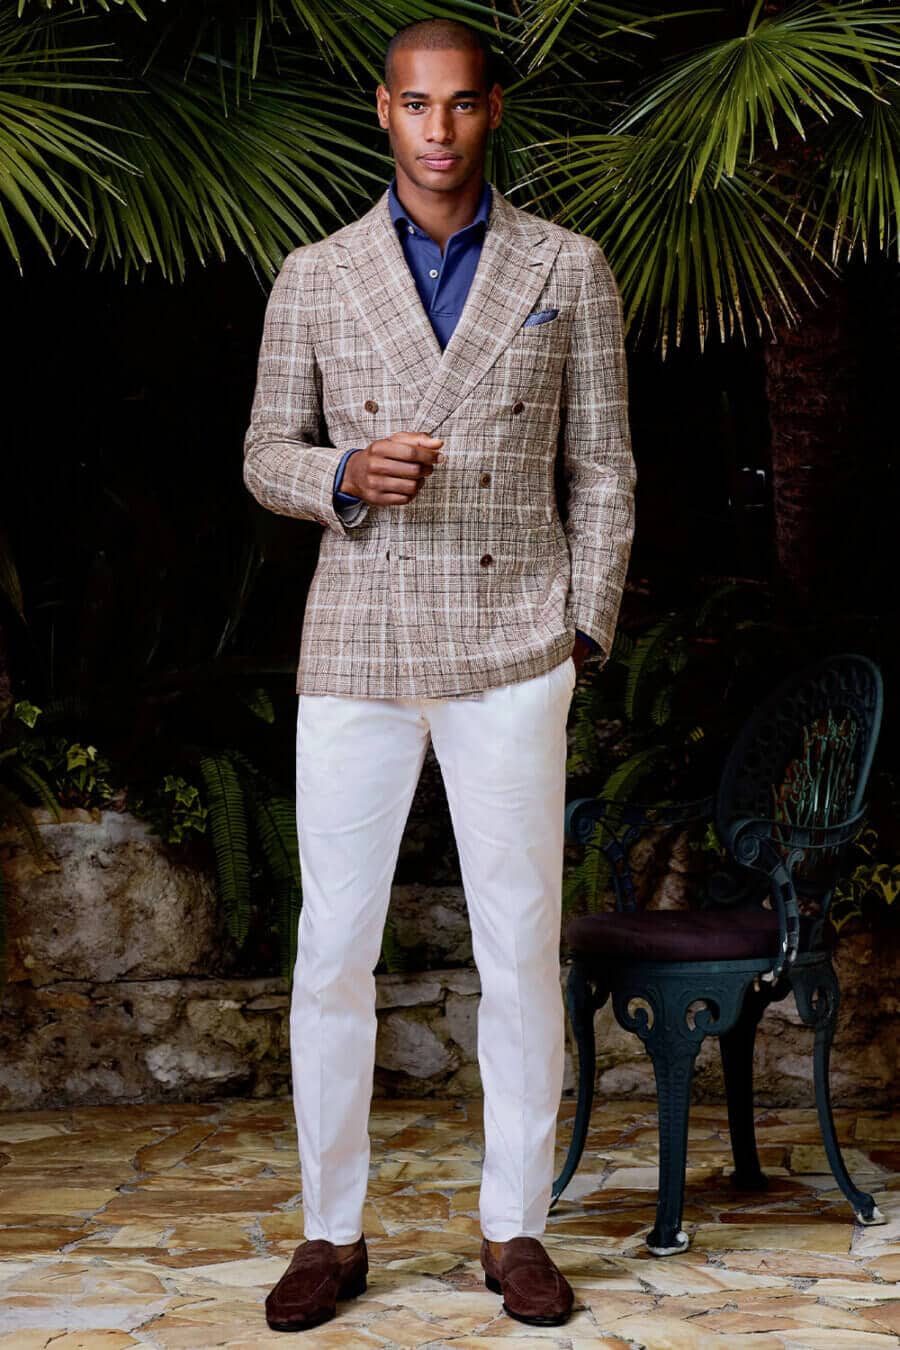 Men's white pants, long sleeve blue polo shirt, double-breasted brown check blazer and brown suede penny loafers outfit